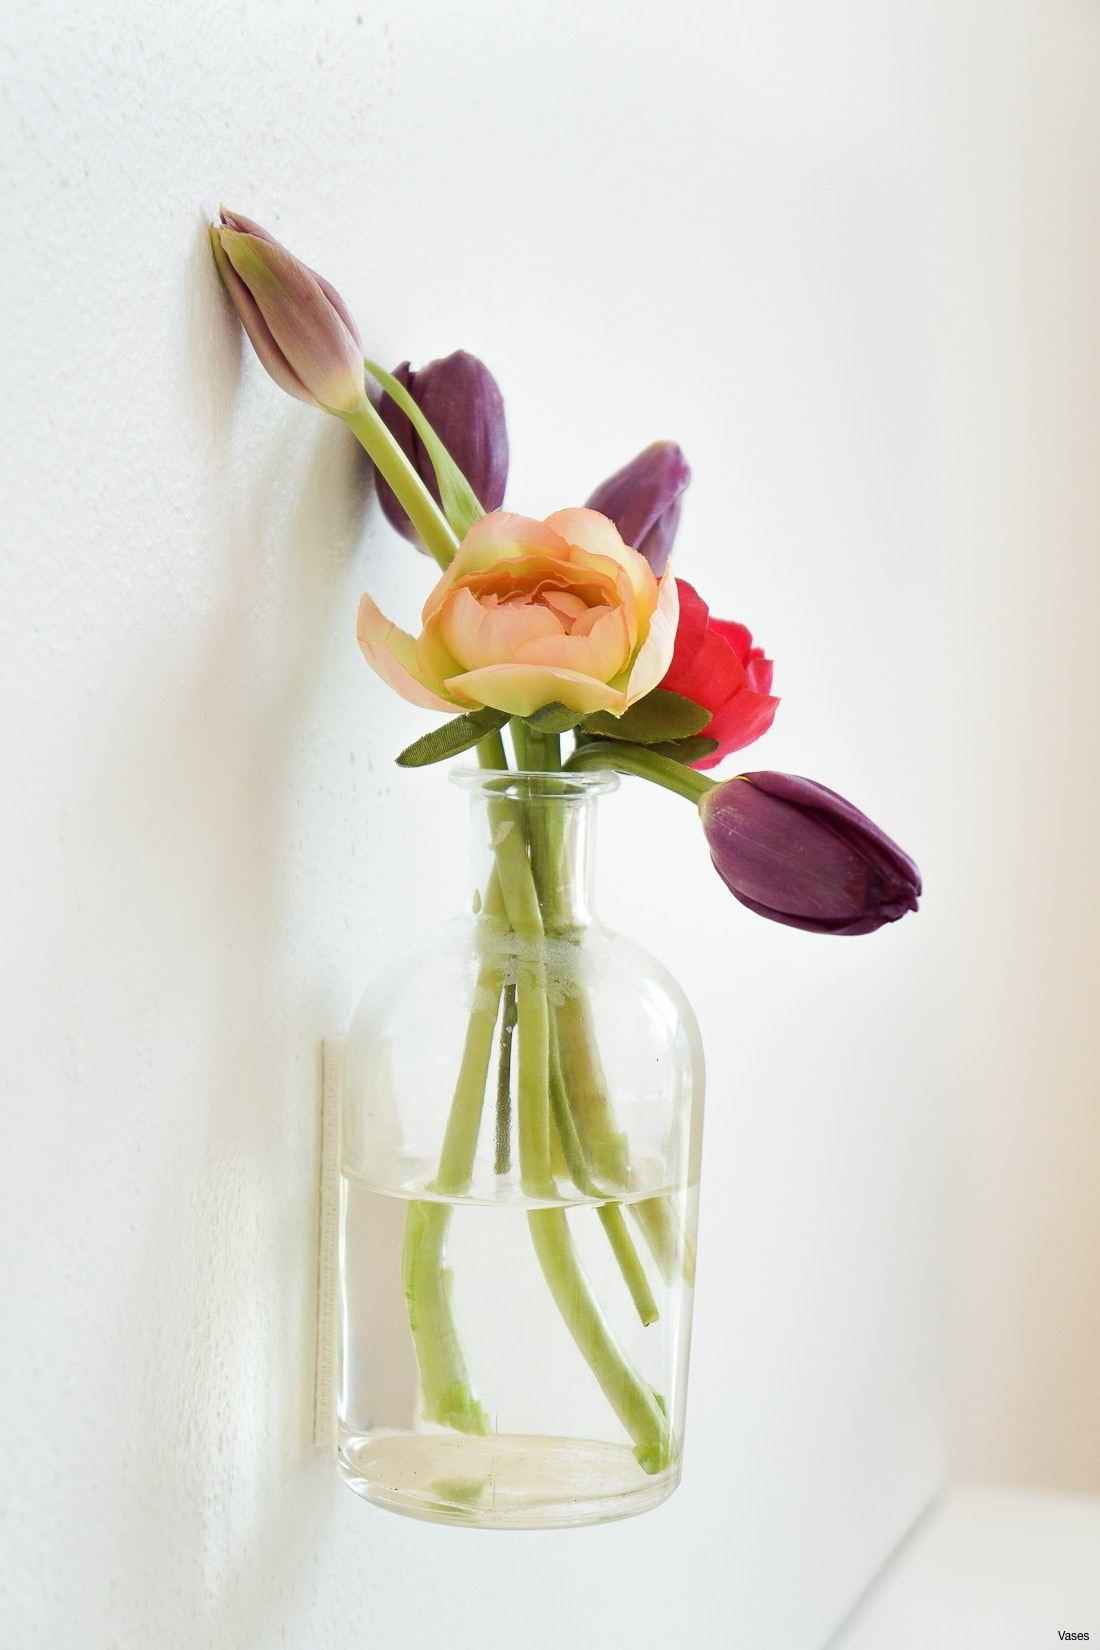 vase of roses images of il fullxfull l7e9h vases wall flower vase zoomi 0d decor inspiration pertaining to il fullxfull l7e9h vases wall flower vase zoomi 0d decor inspiration inspiration of decorative wall sconces